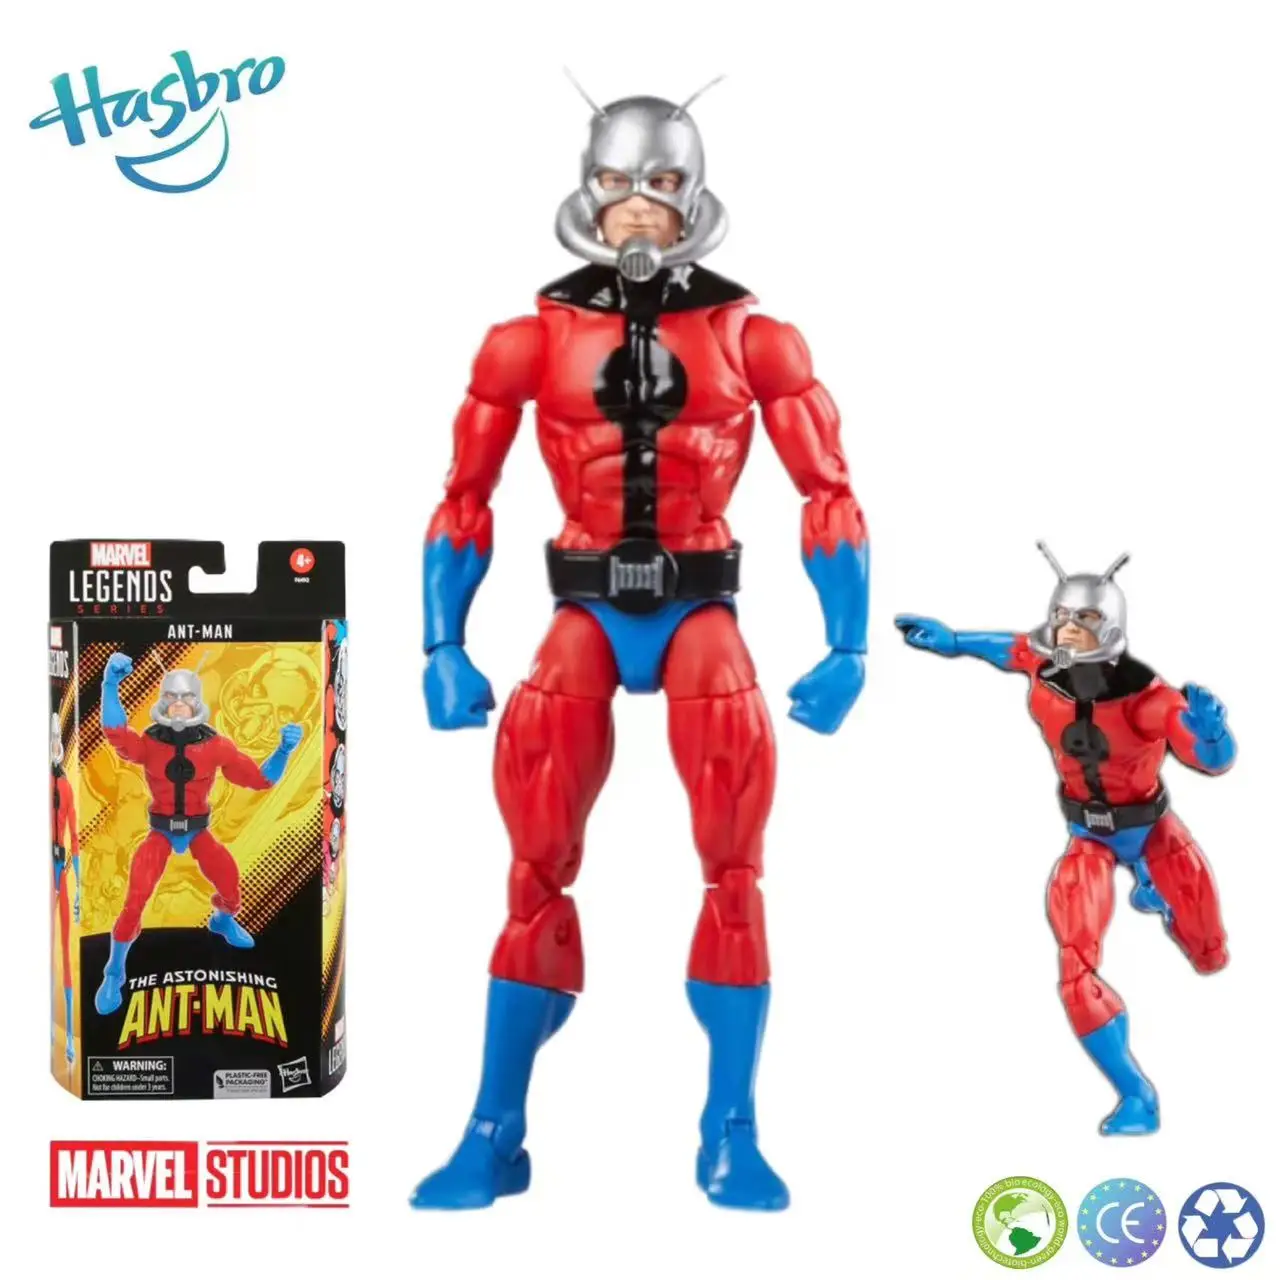 

Hasbro Marvel Legends The Astonishing Ant-Man Fantastic Four Yondu Star-Lord 6-Inch Figure Collection Model In-stock Inventoon